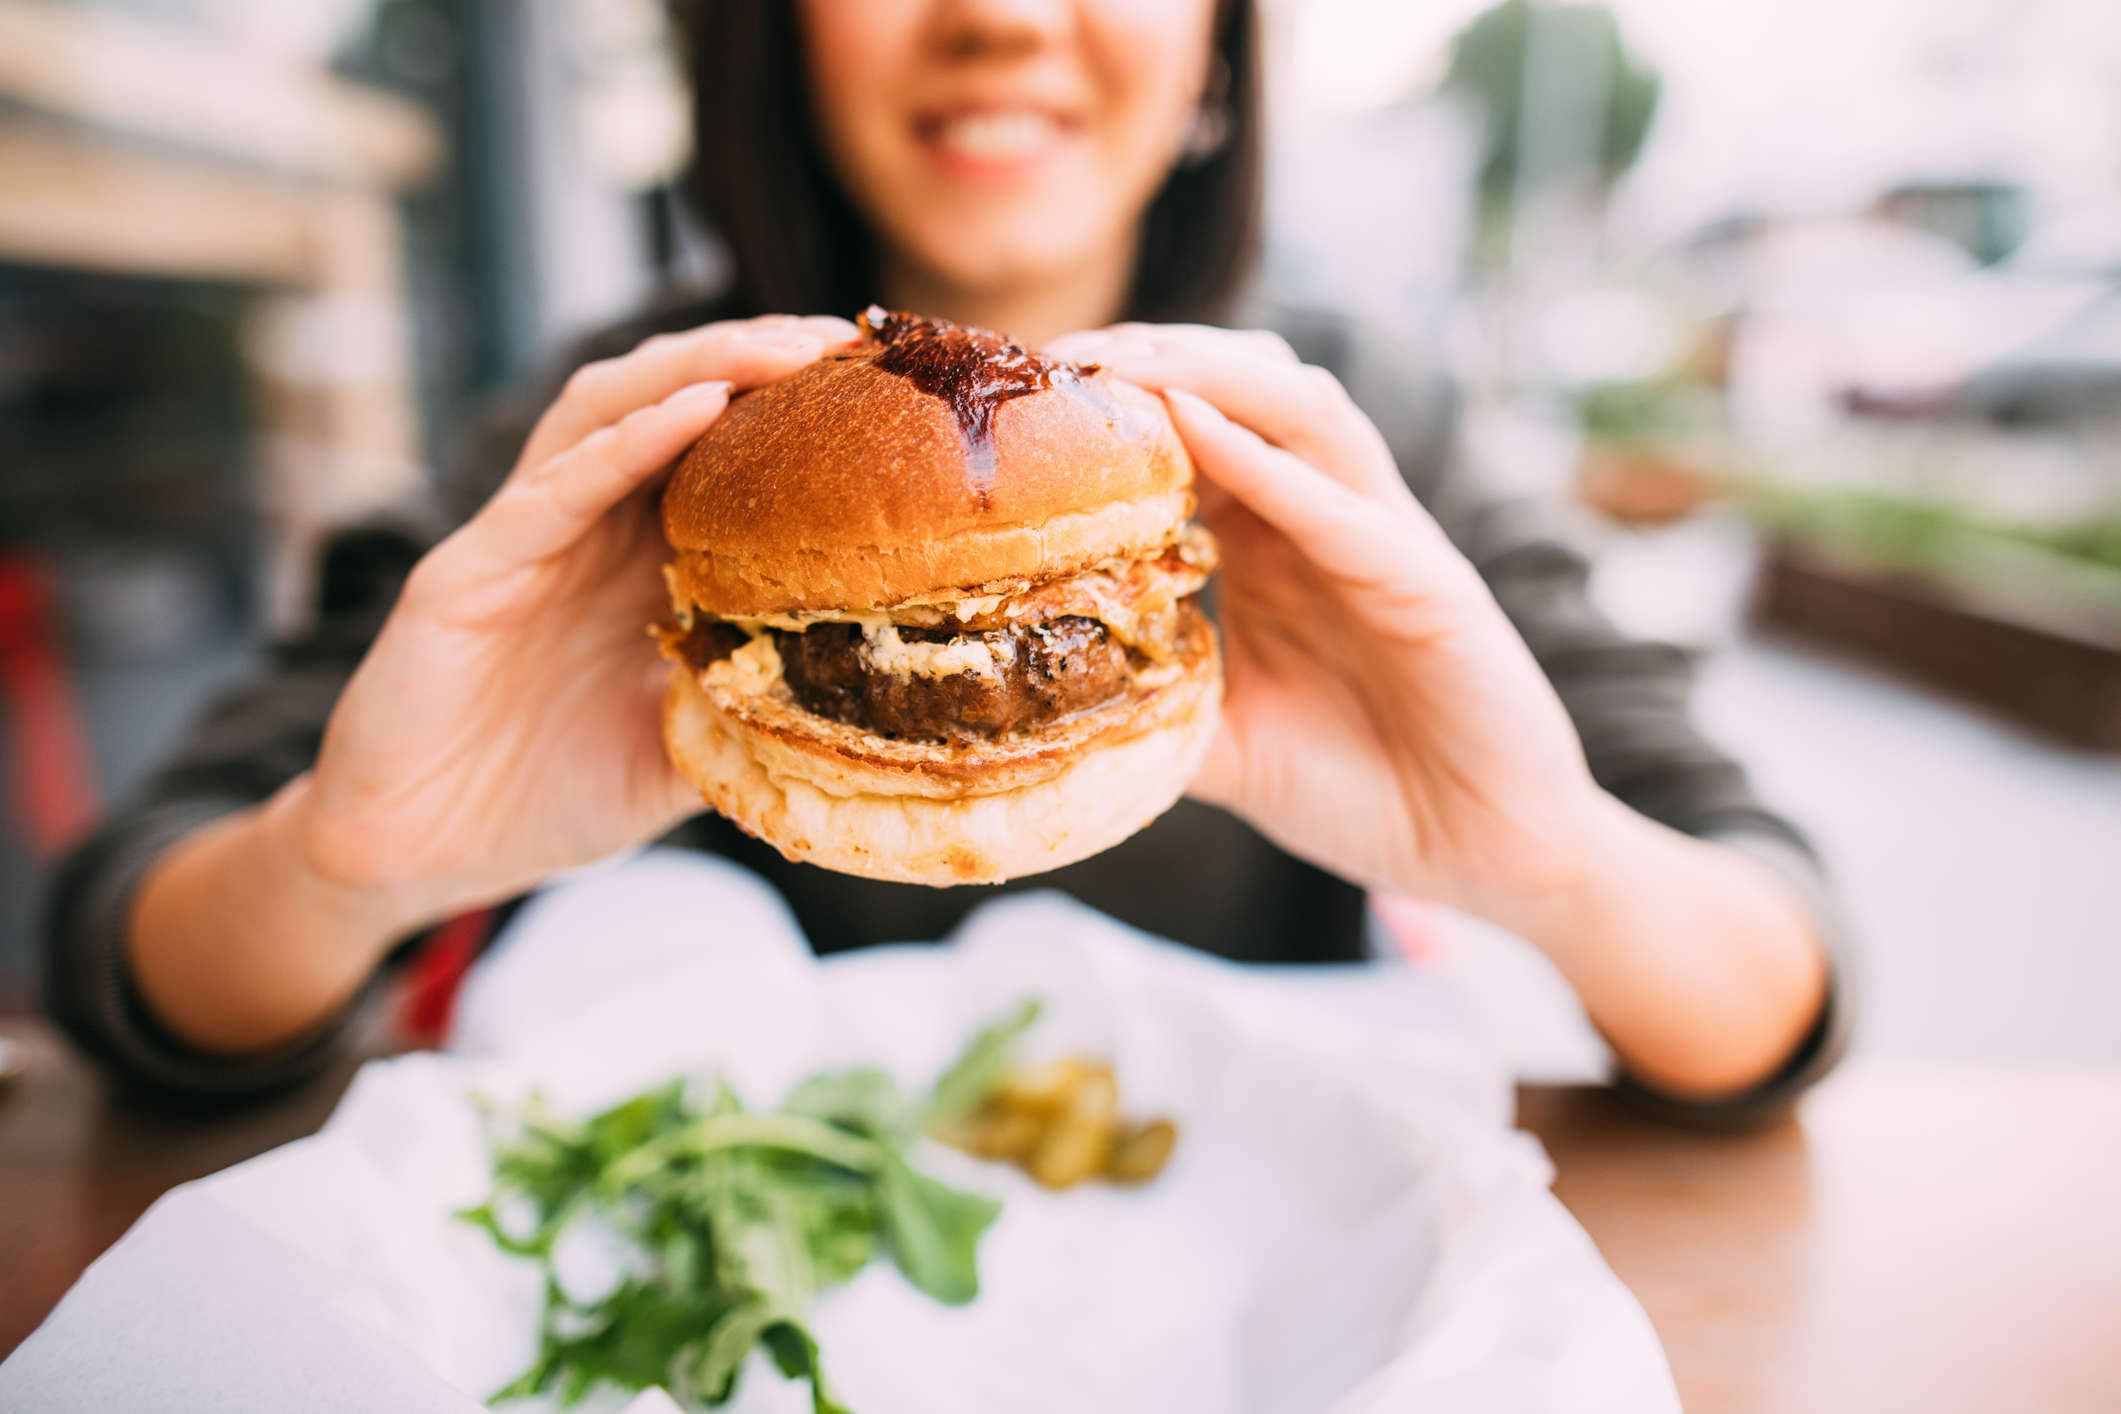 Find the Best Burgers in Flower Mound at Flower Mound Towne Crossing